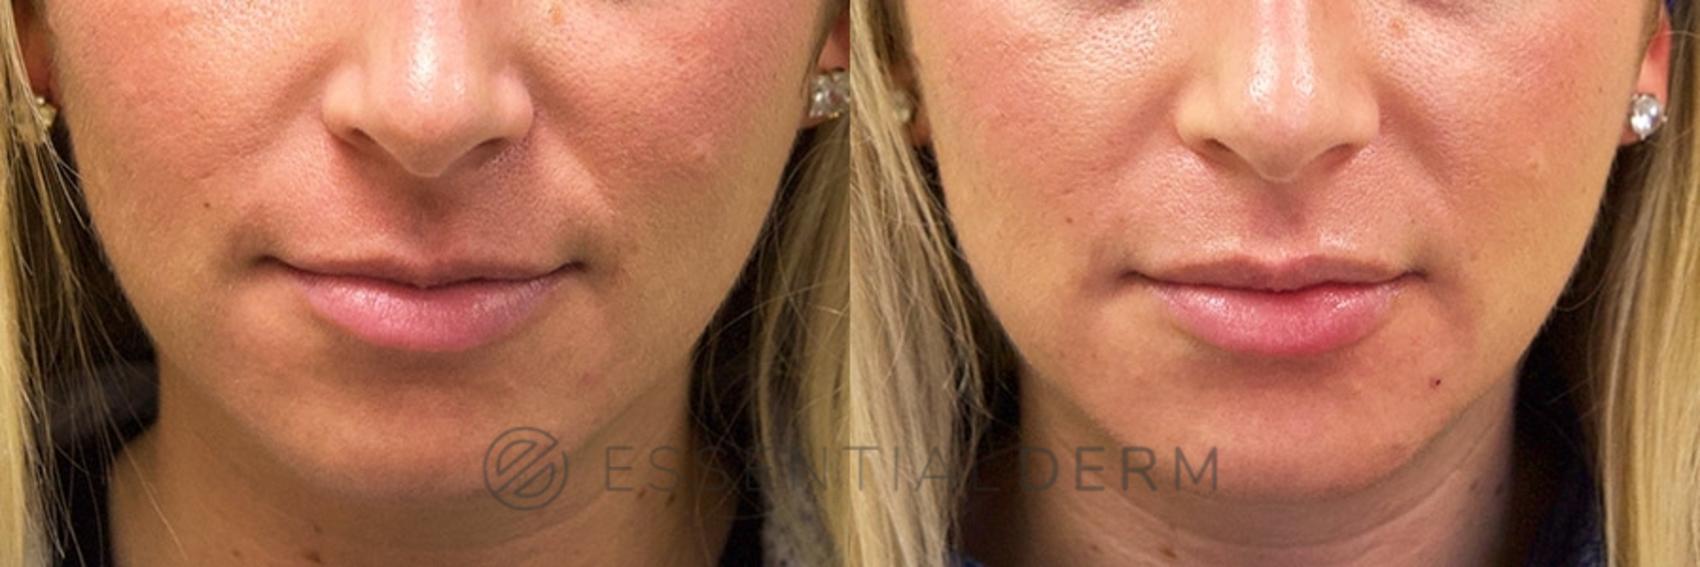 Before & After Dermal Fillers Case 8 Front View in Natick, Weston, Wayland, Framingham, and Wellesley, MA